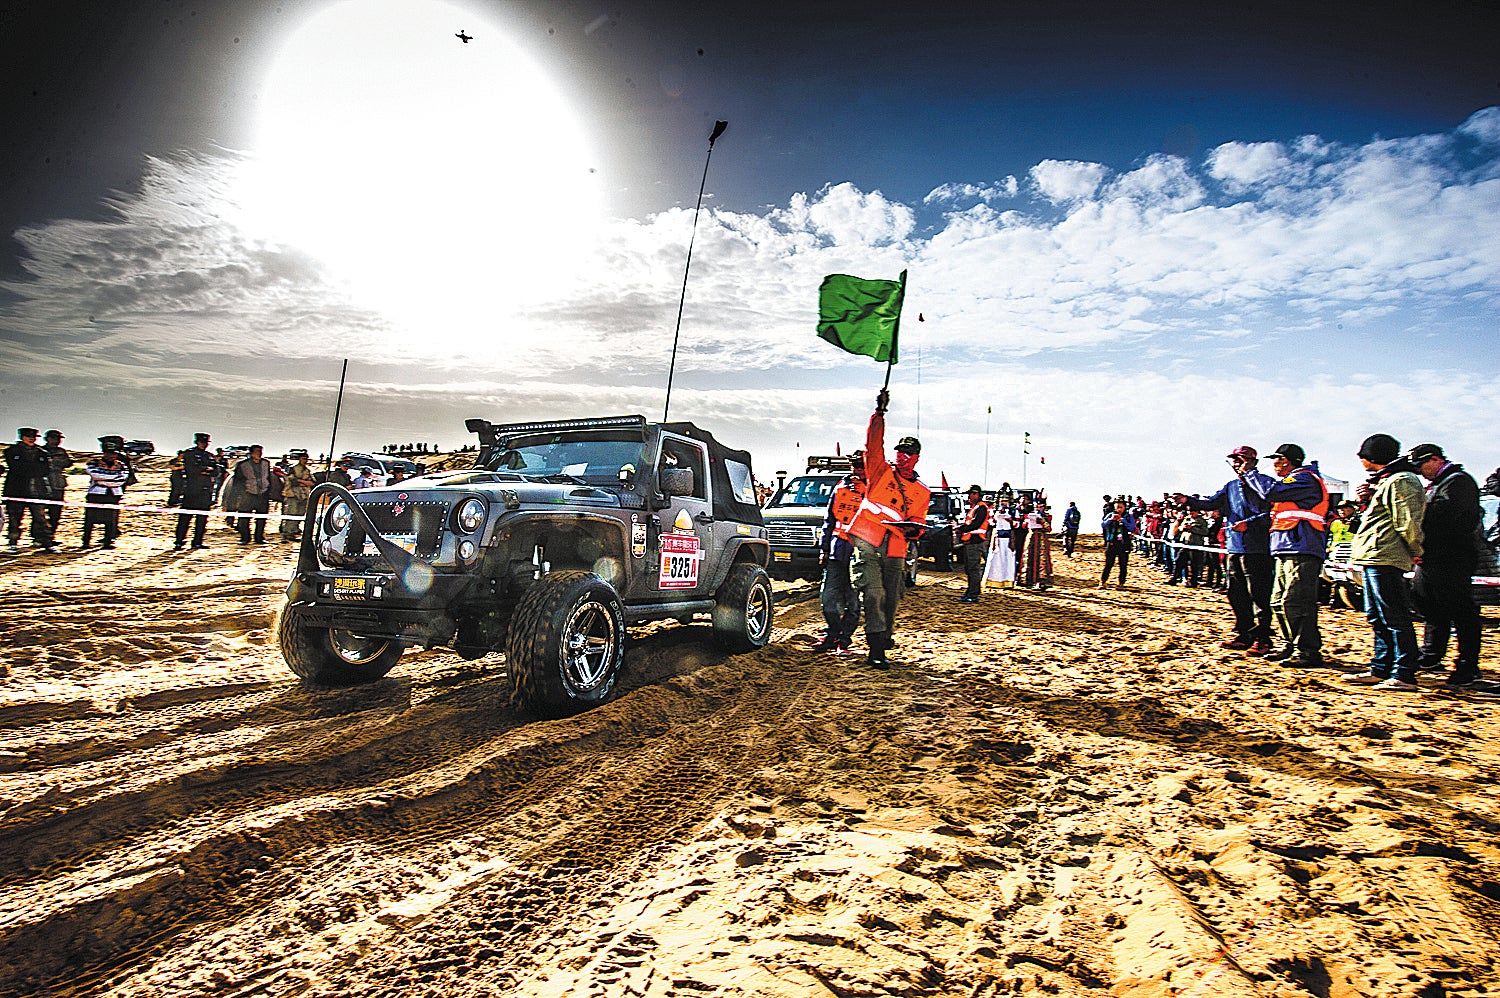 Drivers prepare for a race held in a desert in Alshaa